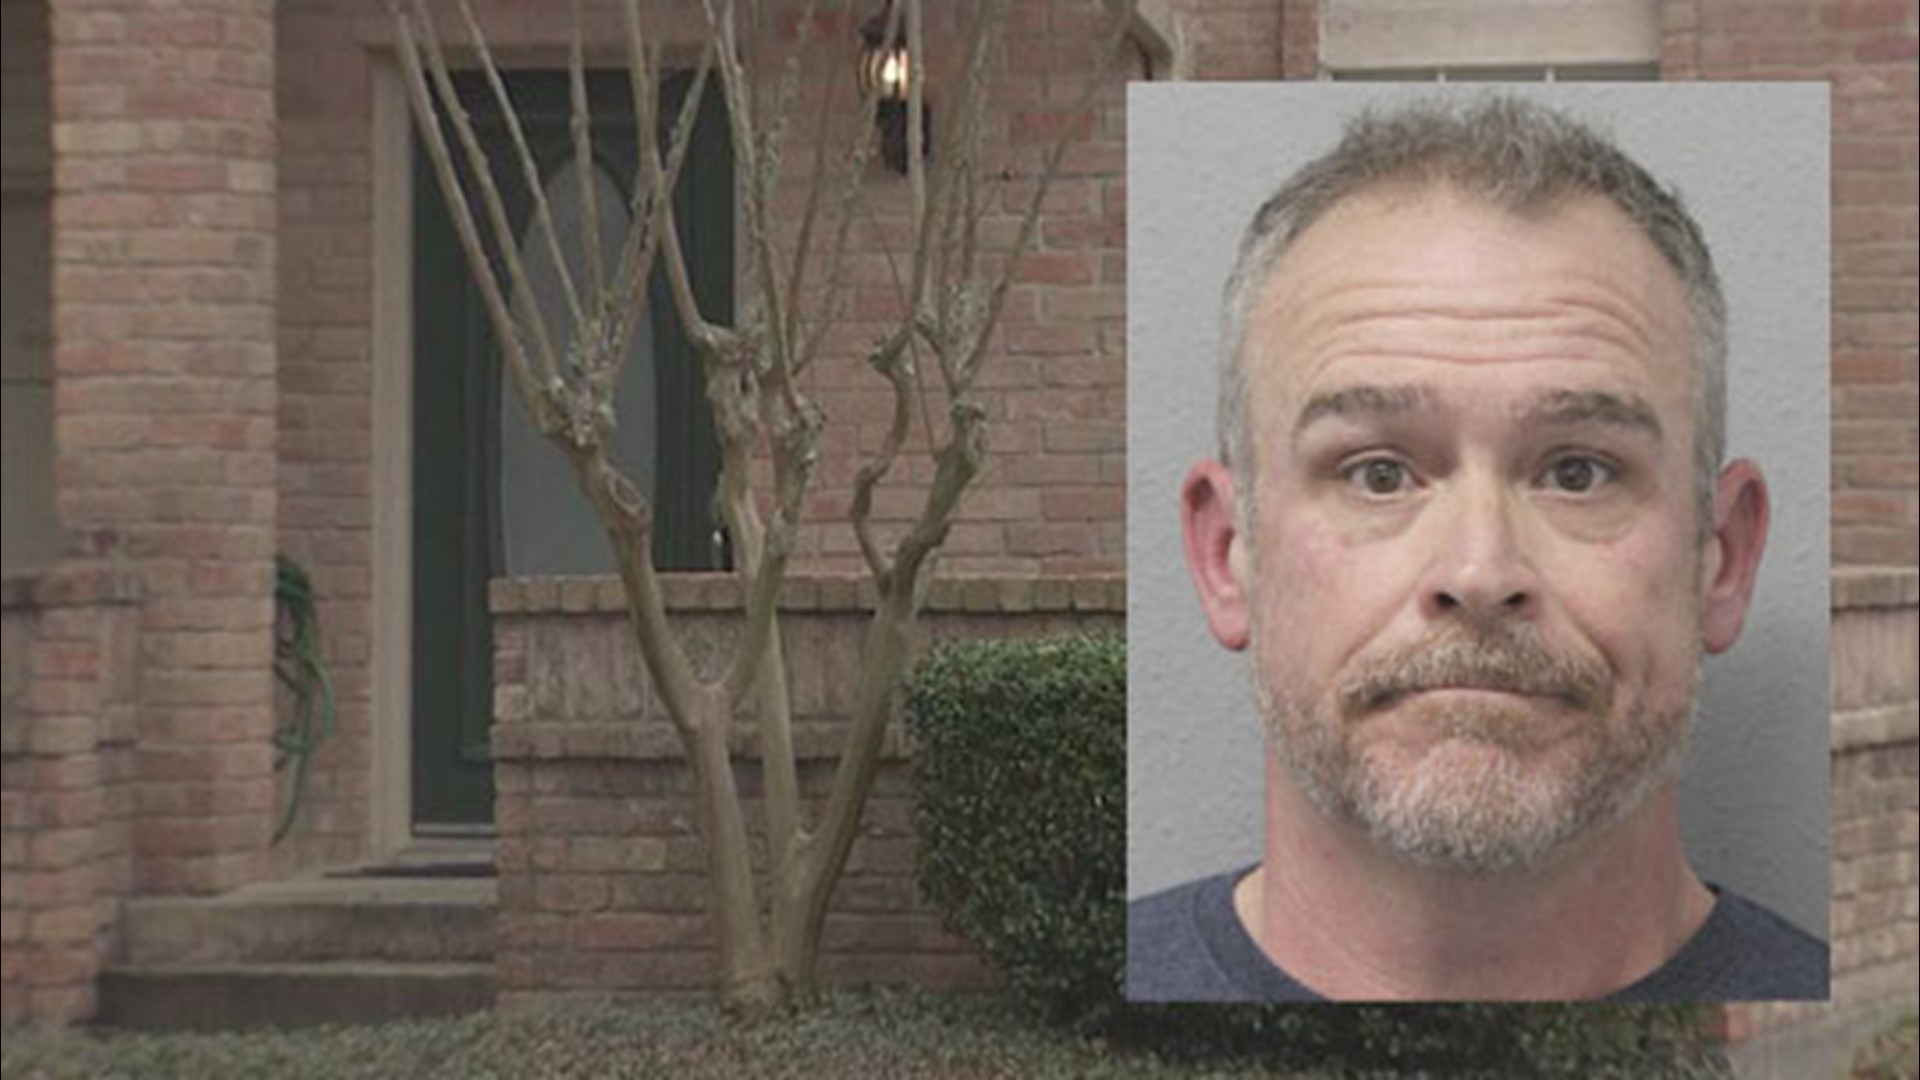 Brian Matthew Burnette, 48, is charged with felony invasive visual recording, according to court documents.